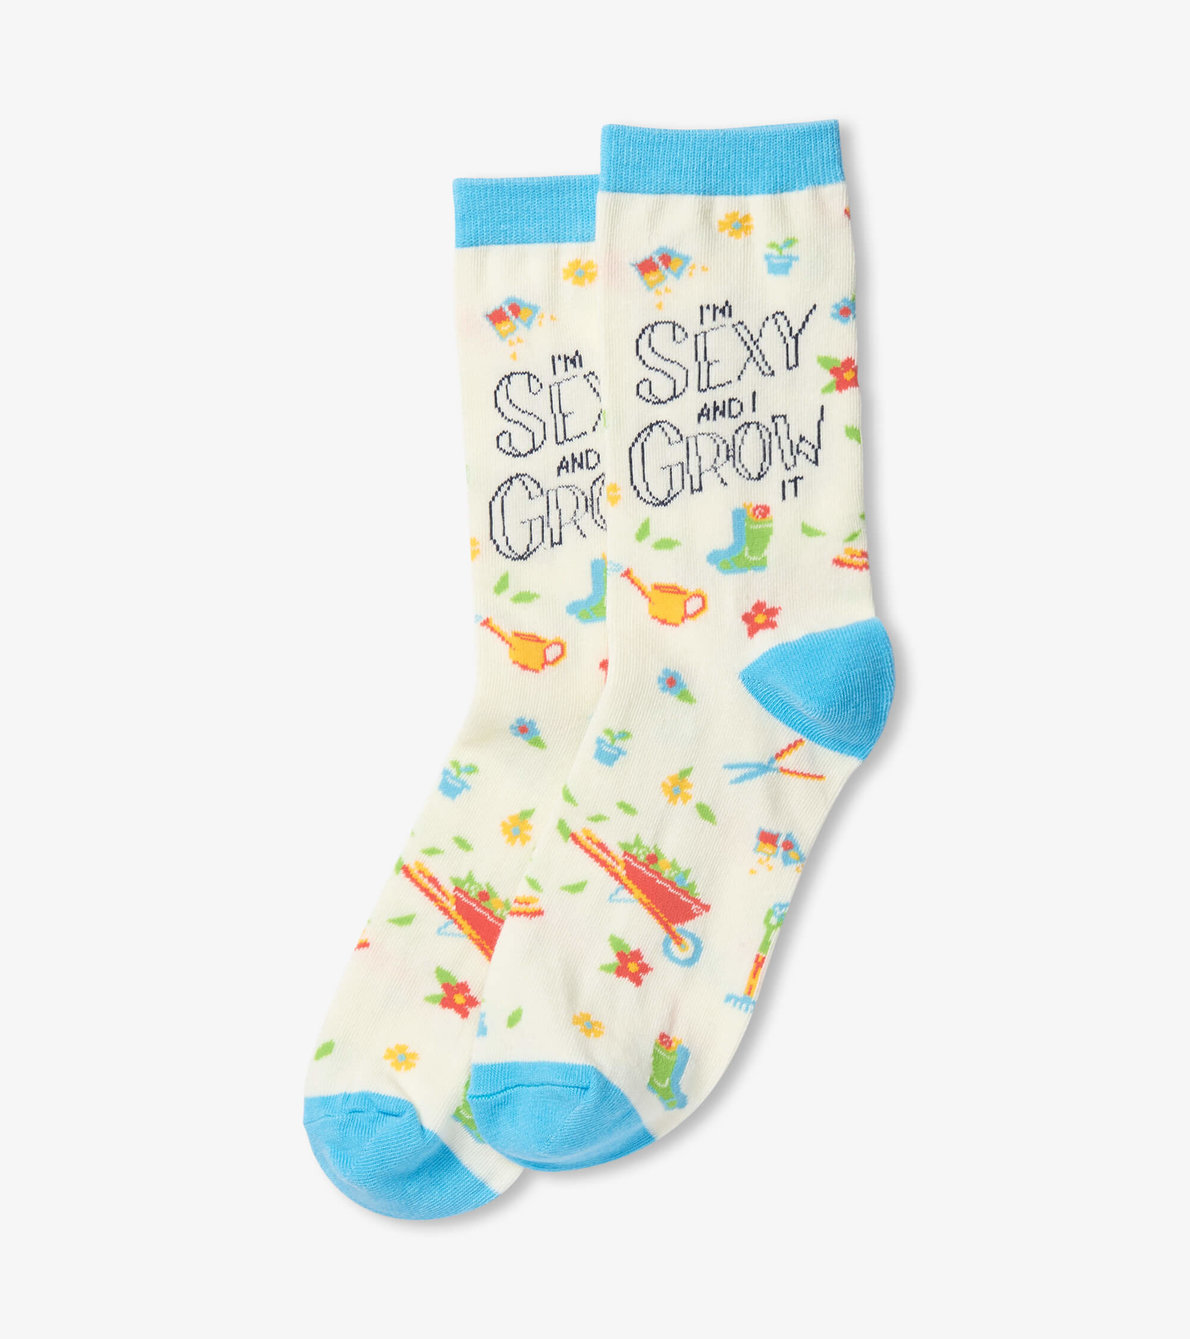 View larger image of Sexy And I Grow It Women's Crew Socks